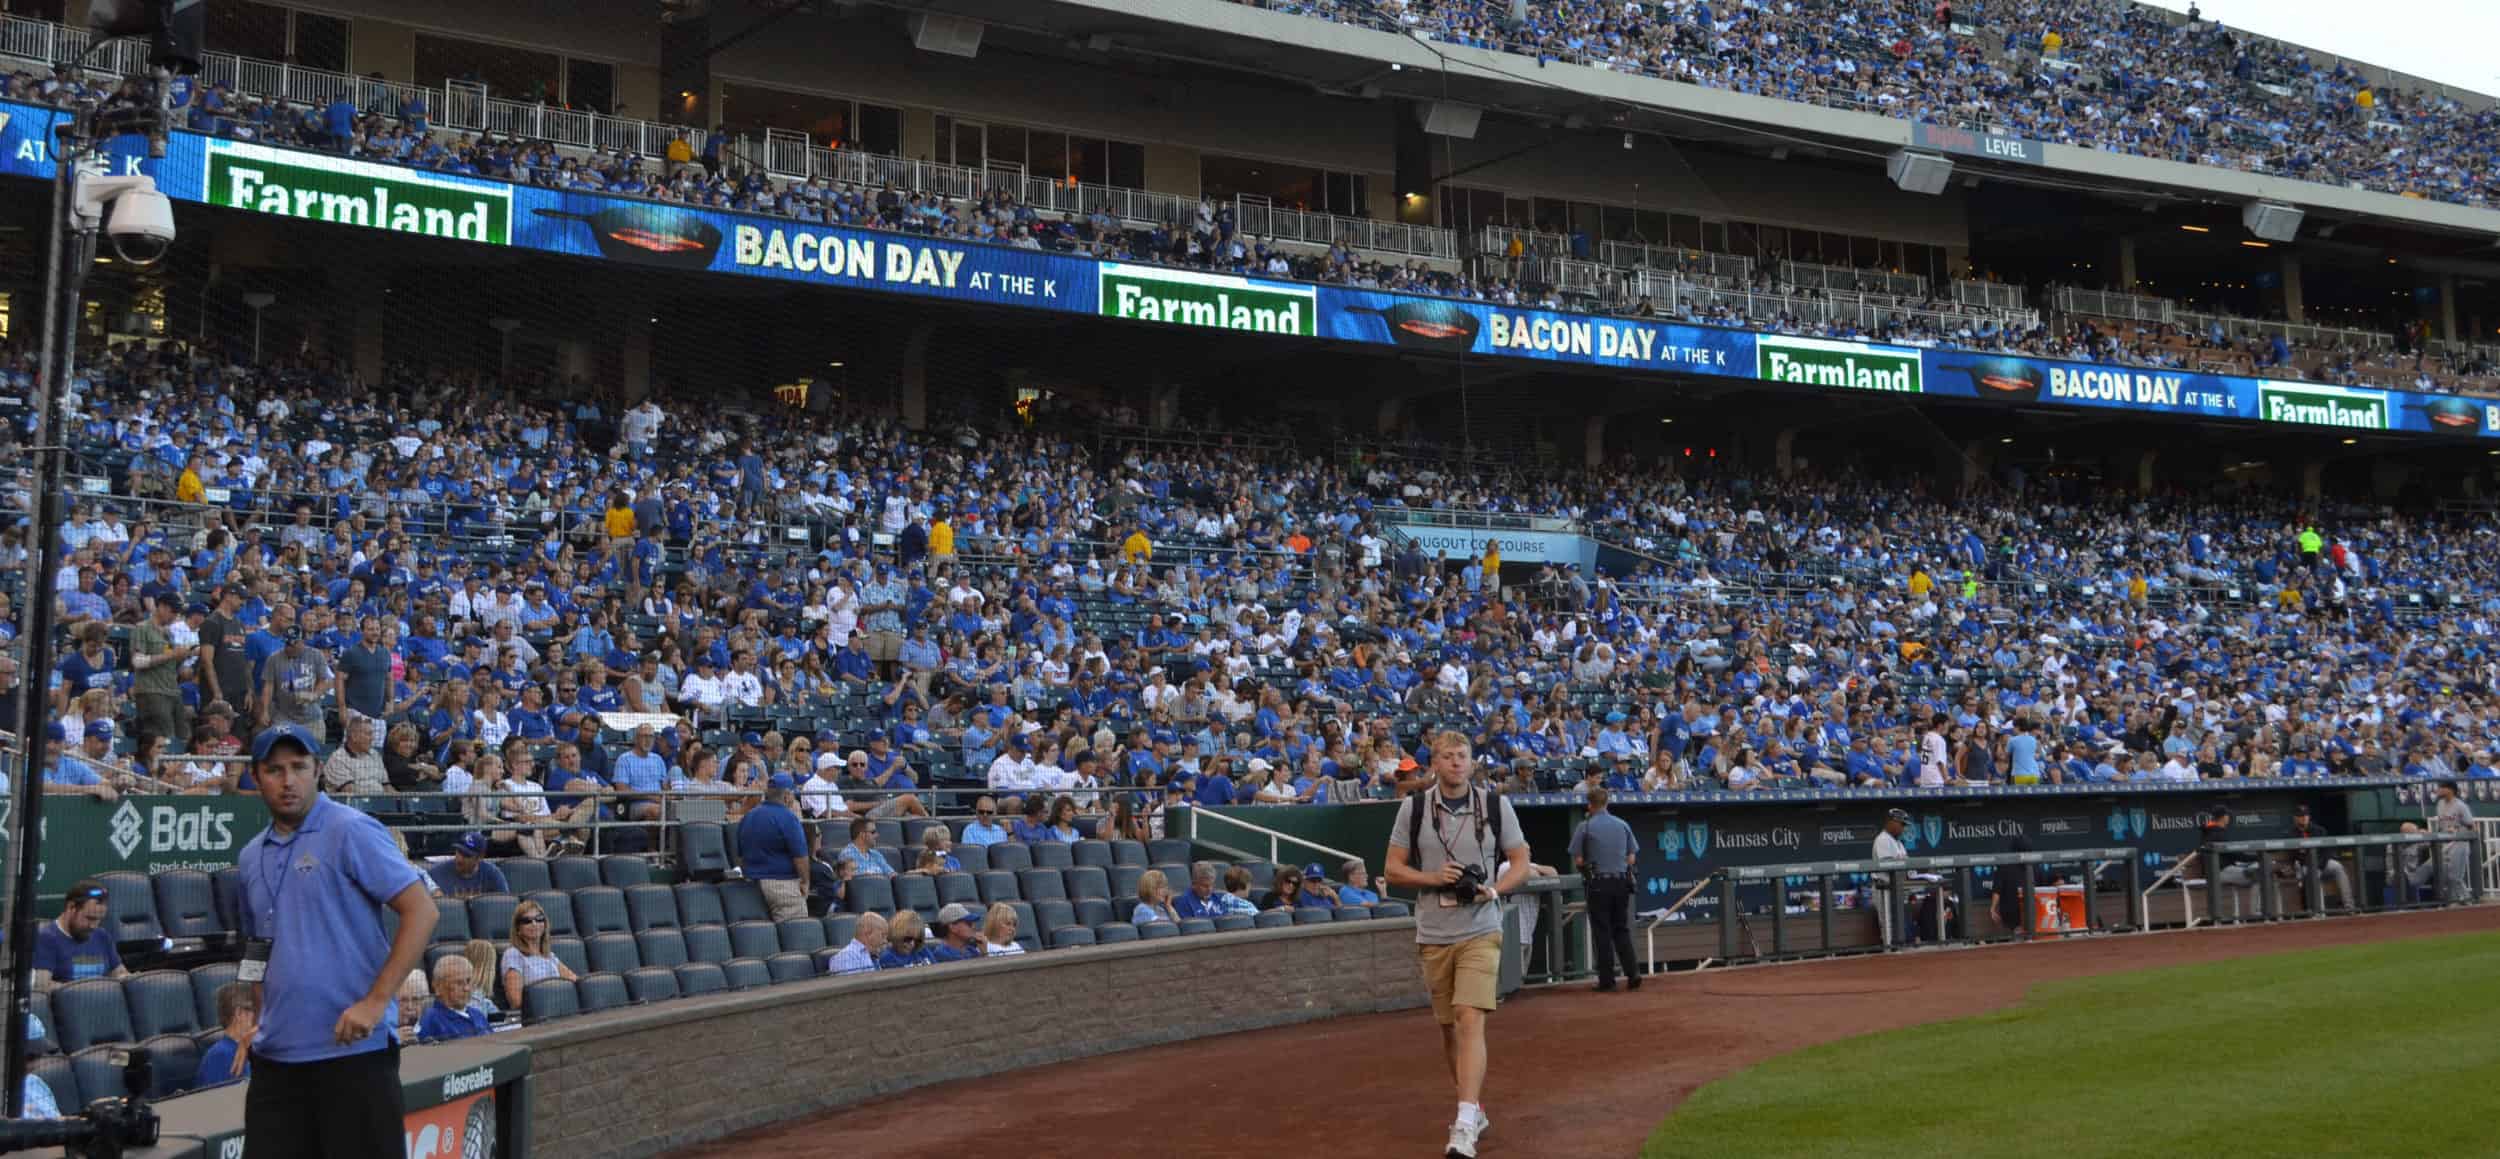 Bacon Day at the K